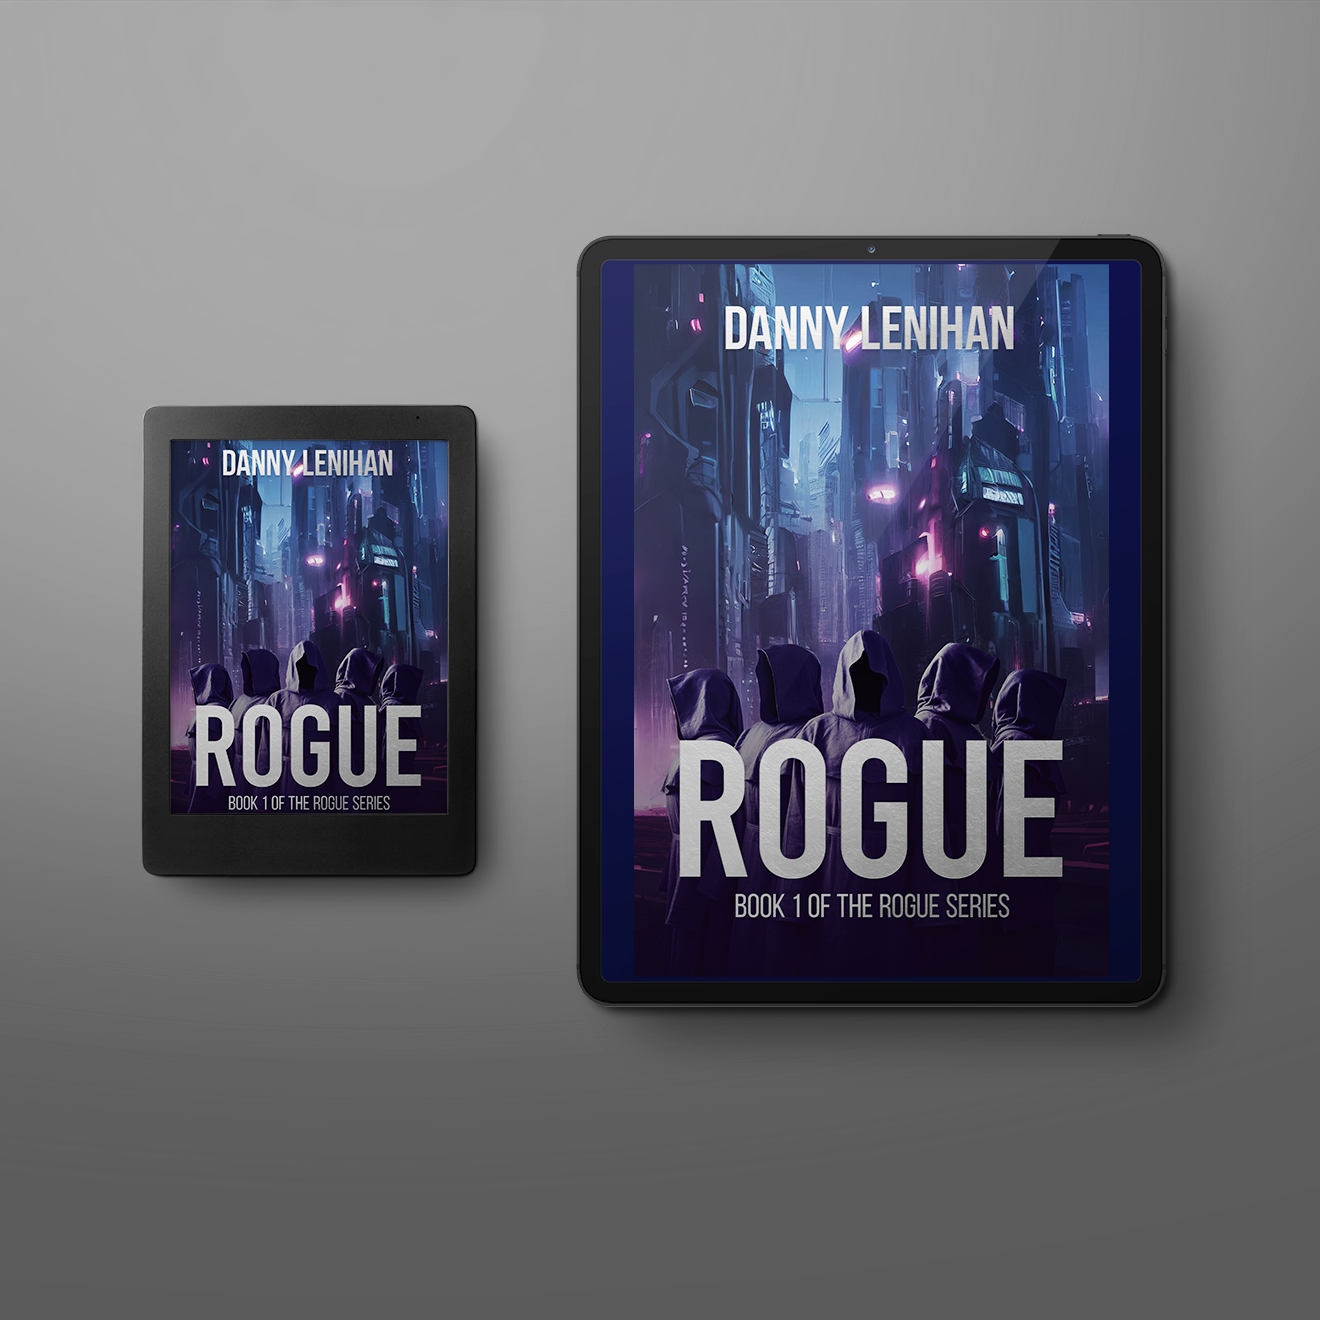 Rogue: Book 1 of The Rogue Series - eBook Edition